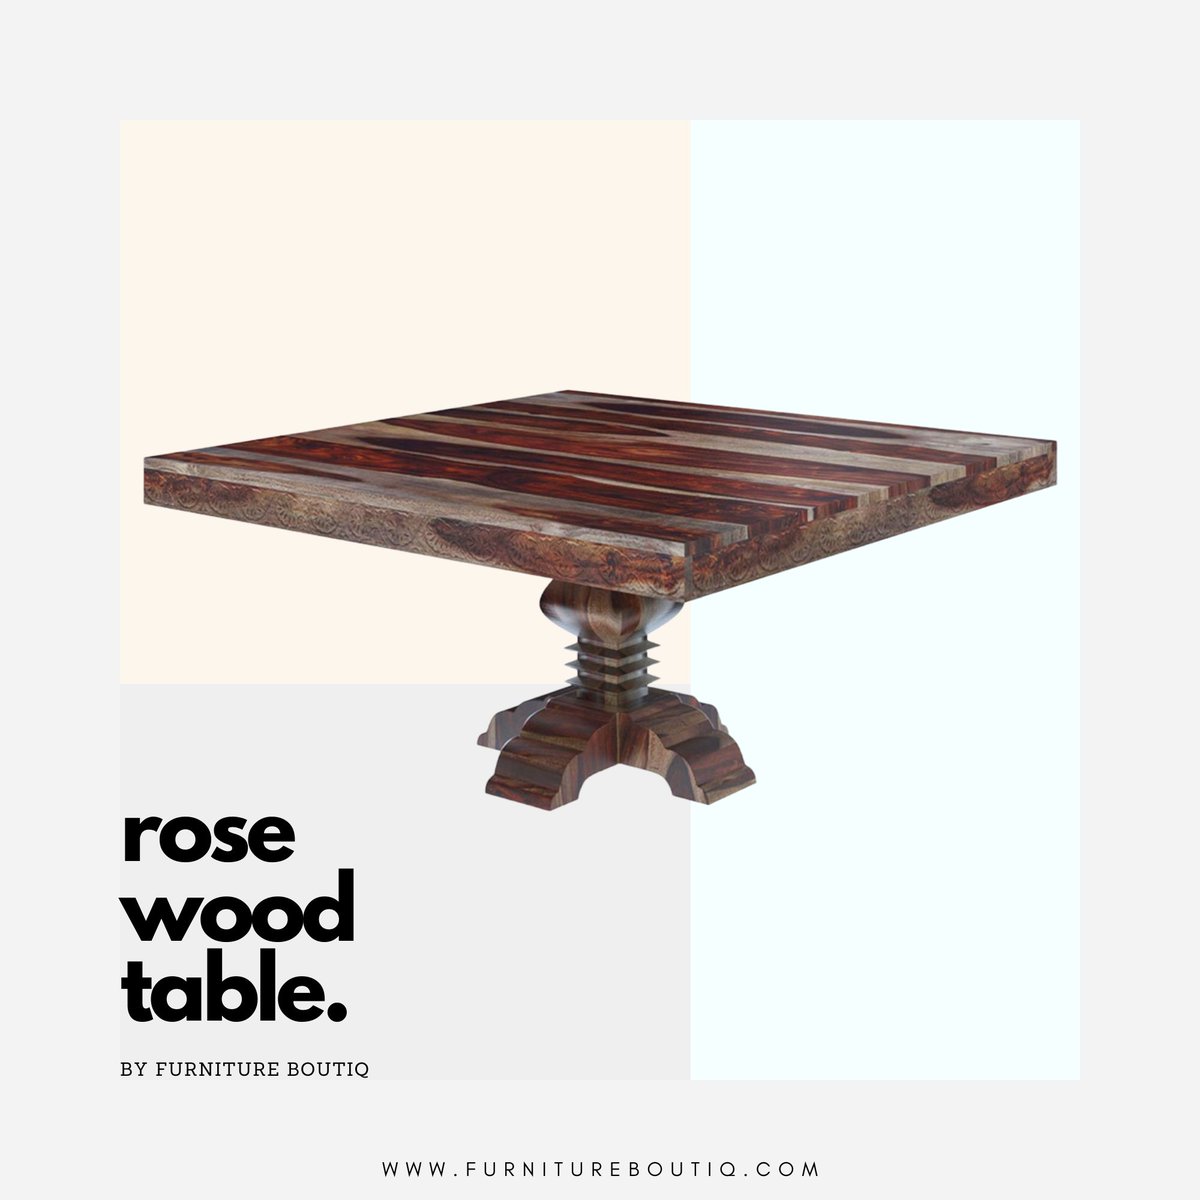 This solid wood dining table is made of 100% Rosewood that gives your dining space with all the aesthetics to make it warm and inviting.

furnitureboutiq.com

#diningtable #dining #diningtableset #diningtableset #diningroomfurniture #diningroomdesign #diningtableideas